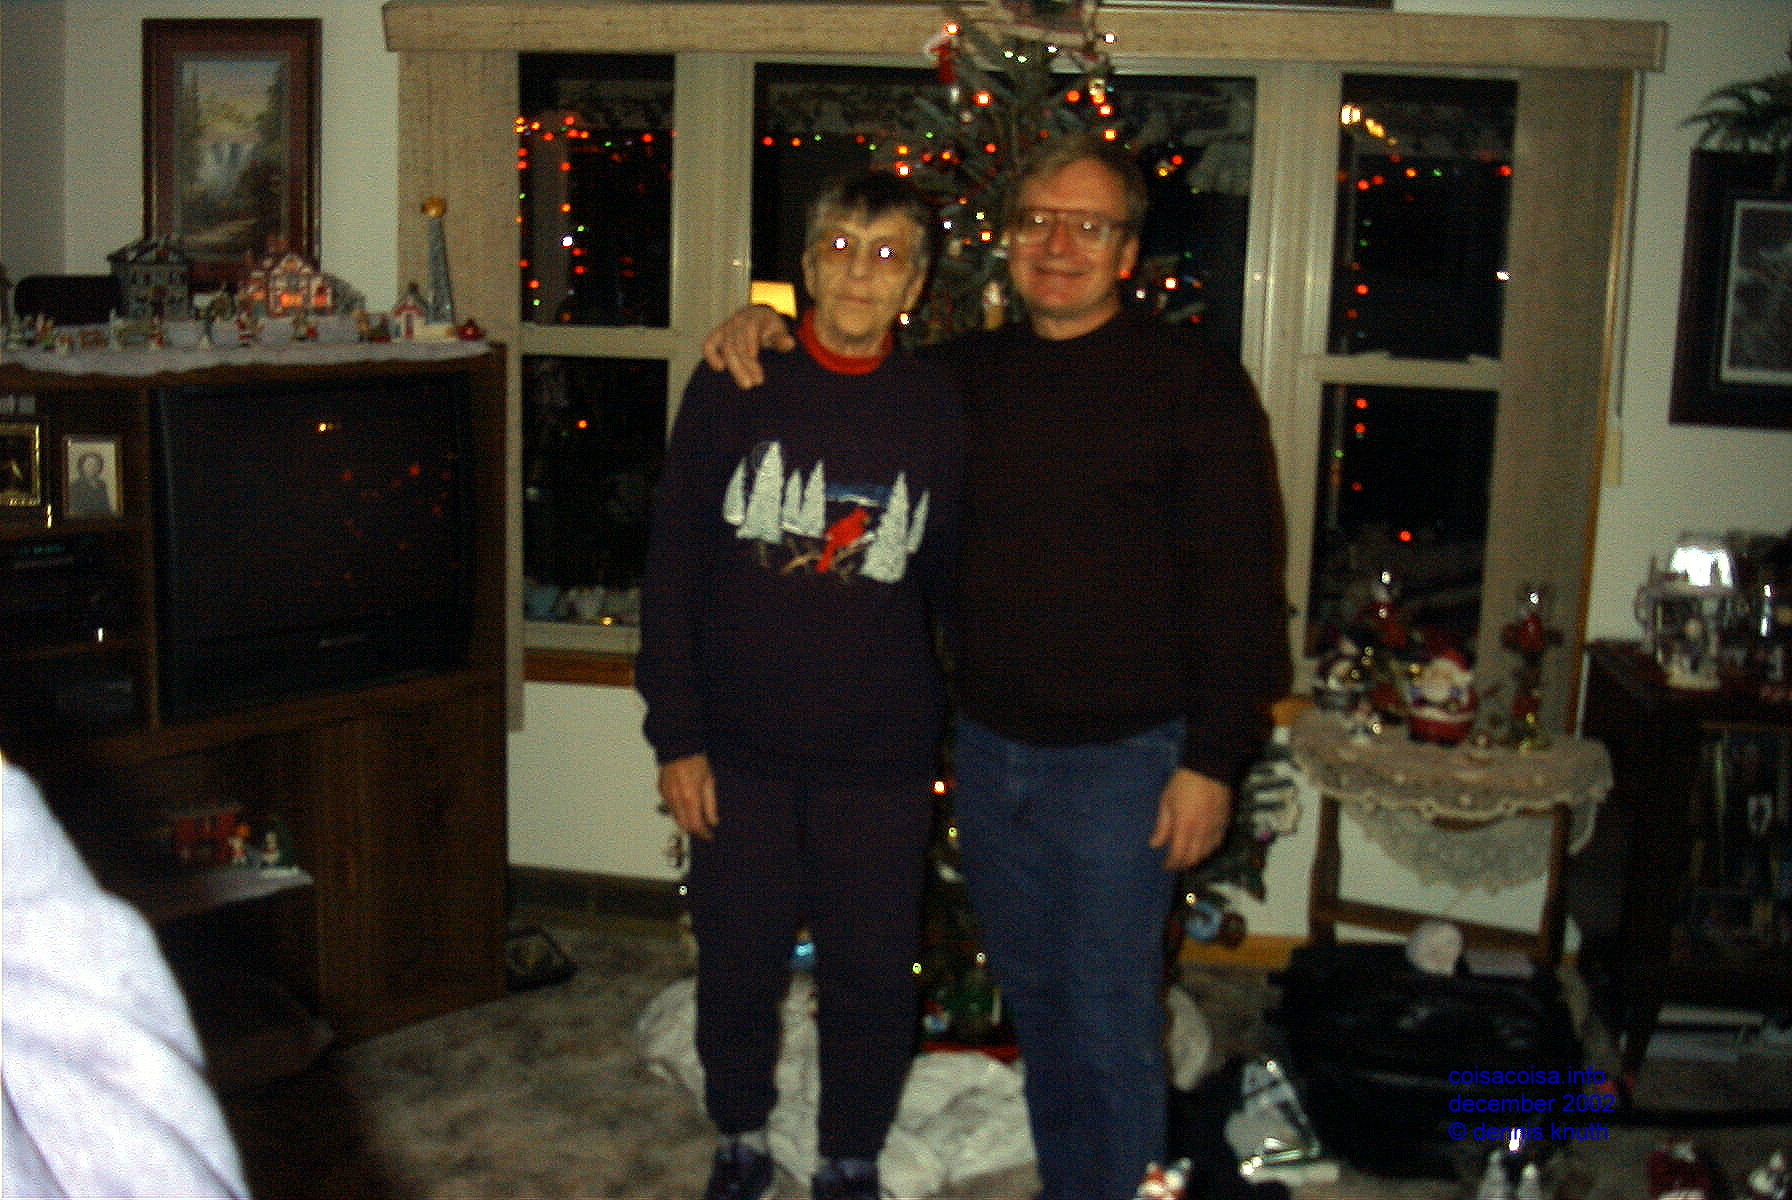 Dennis and Emogene in 2002 in front of the tree